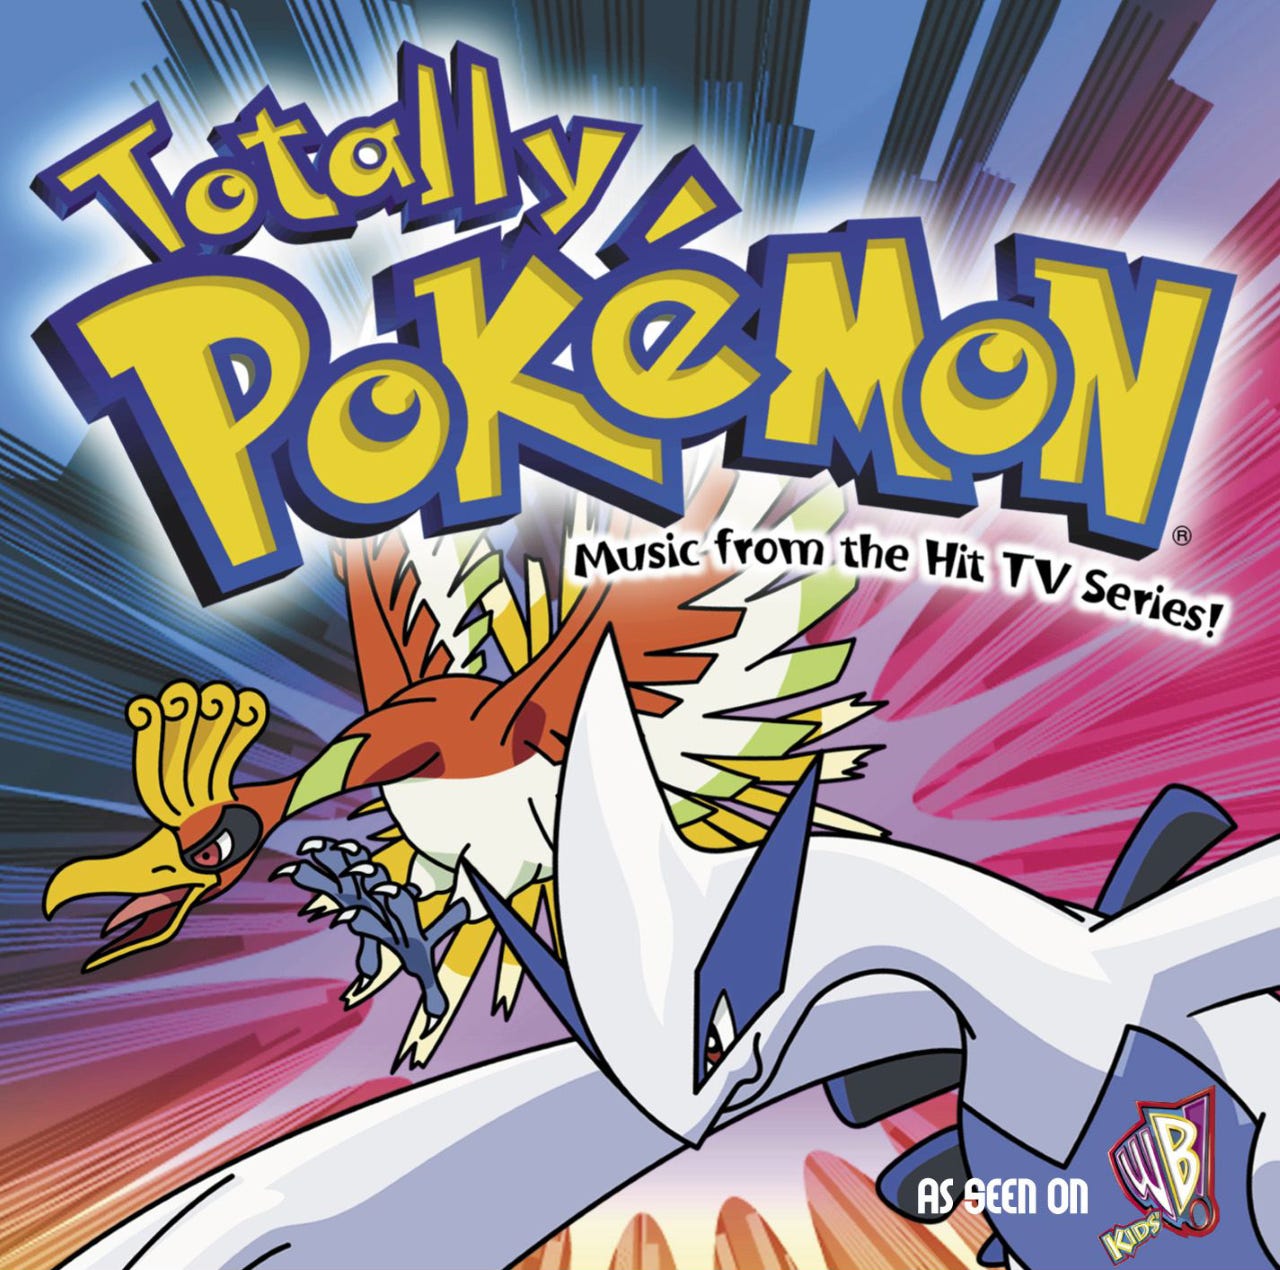 Totally Pokémon was released on January 23rd 2001 in North America, and featured twelve vocal tracks, along with seven Karaoke versions